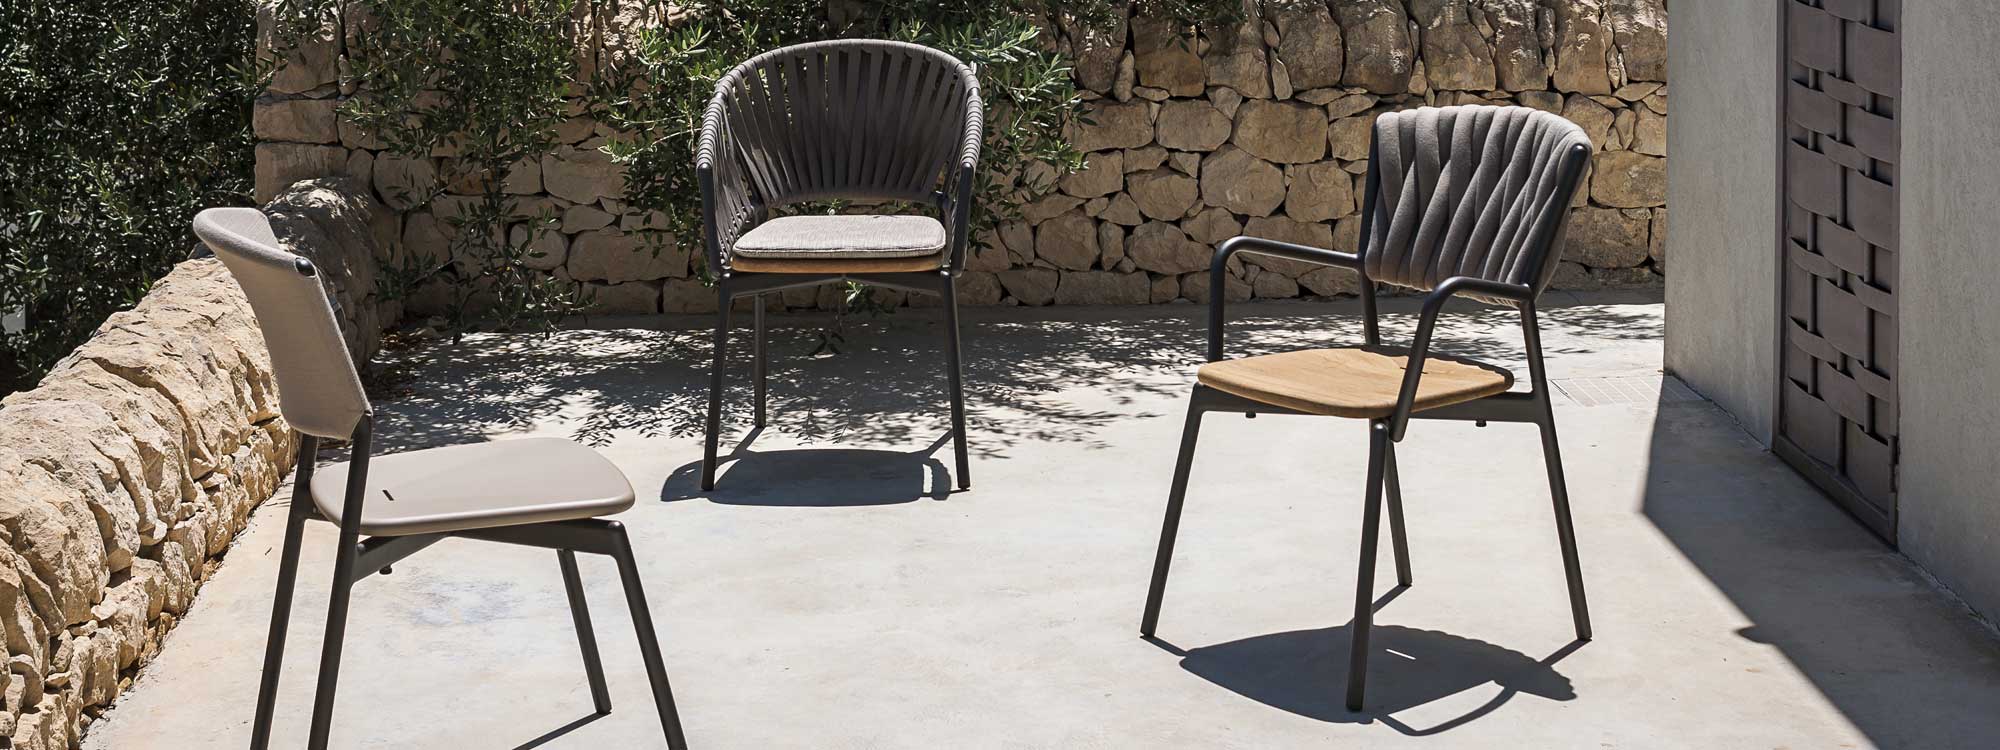 Image of 3 different Piper aluminium garden chairs by RODA on sunny Italian terrace